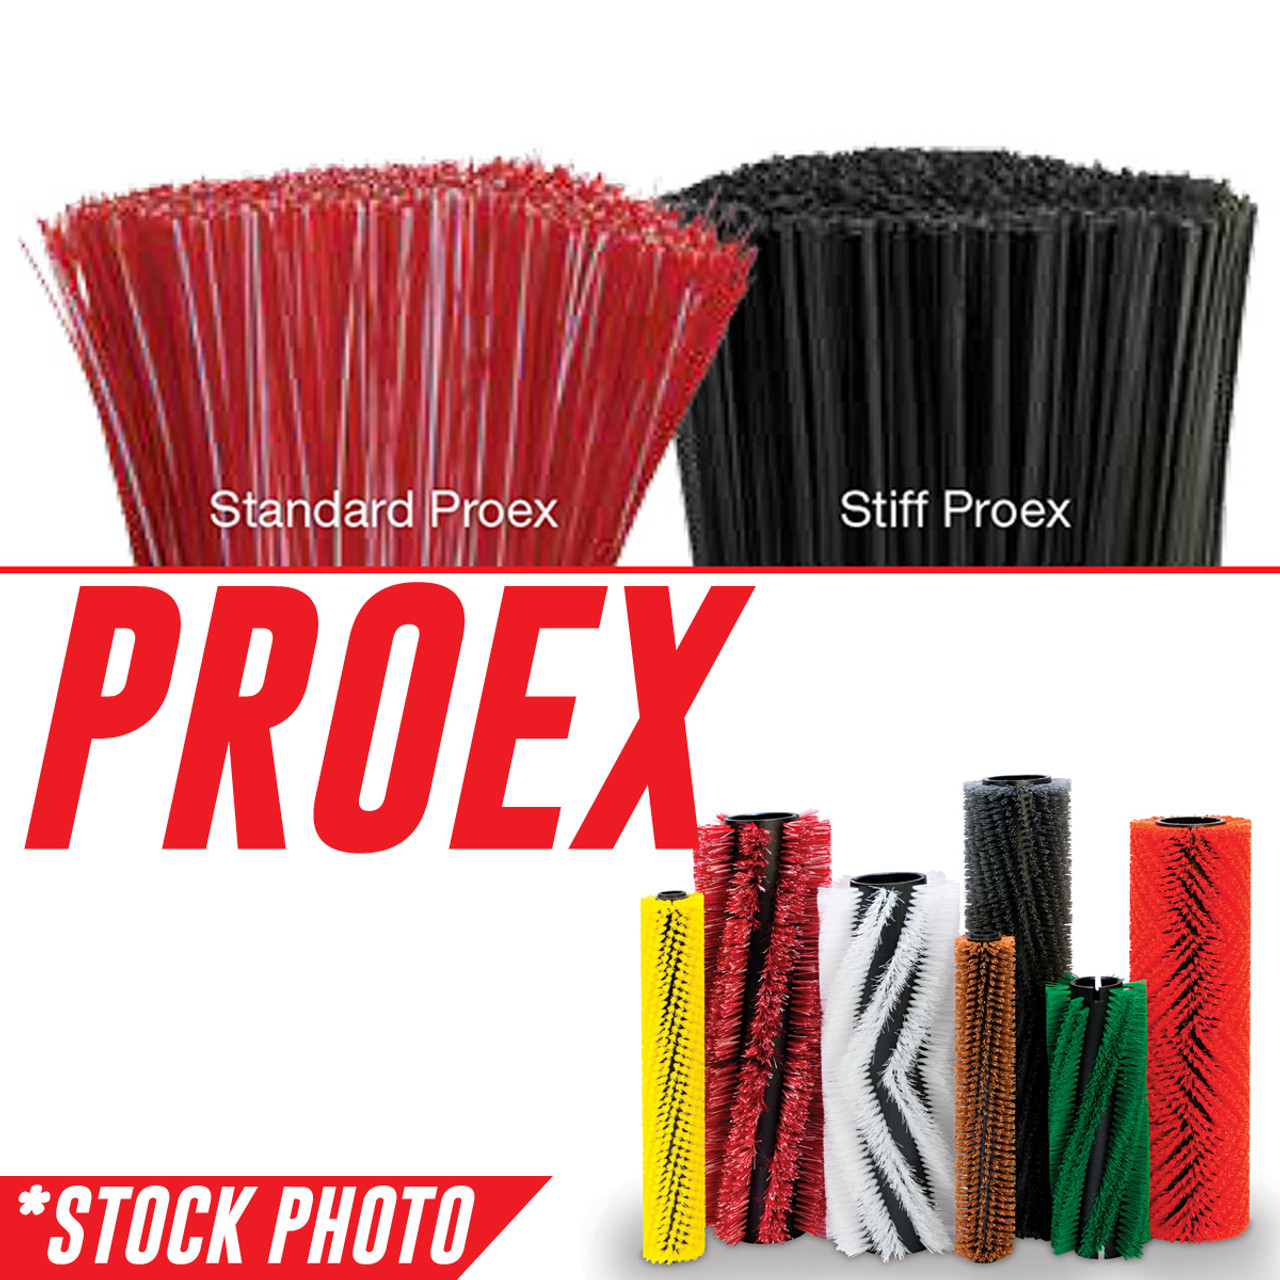 3305809: 42" Cylindrical Brush 8 Double Row Proex fits PowerBoss Models 5550, 80, 82, Commander 82, Core 50, CSS/82, SW/75II, SW/8X, TSS/82